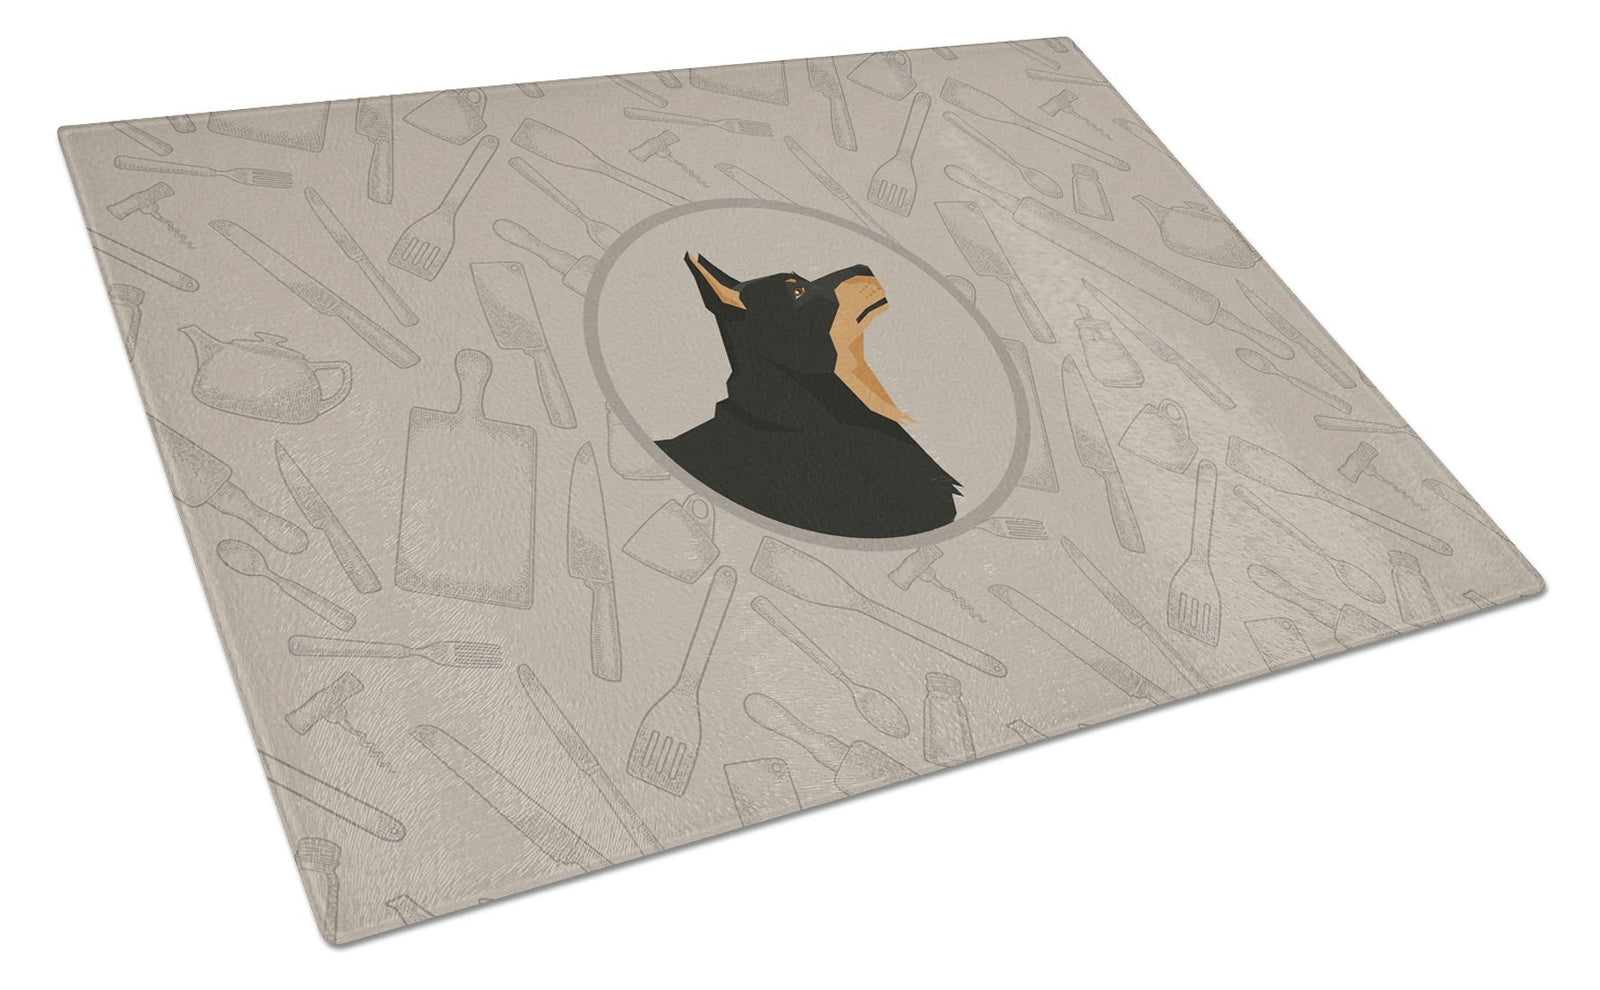 Lancashire Terrier In the Kitchen Glass Cutting Board Large CK2197LCB by Caroline's Treasures